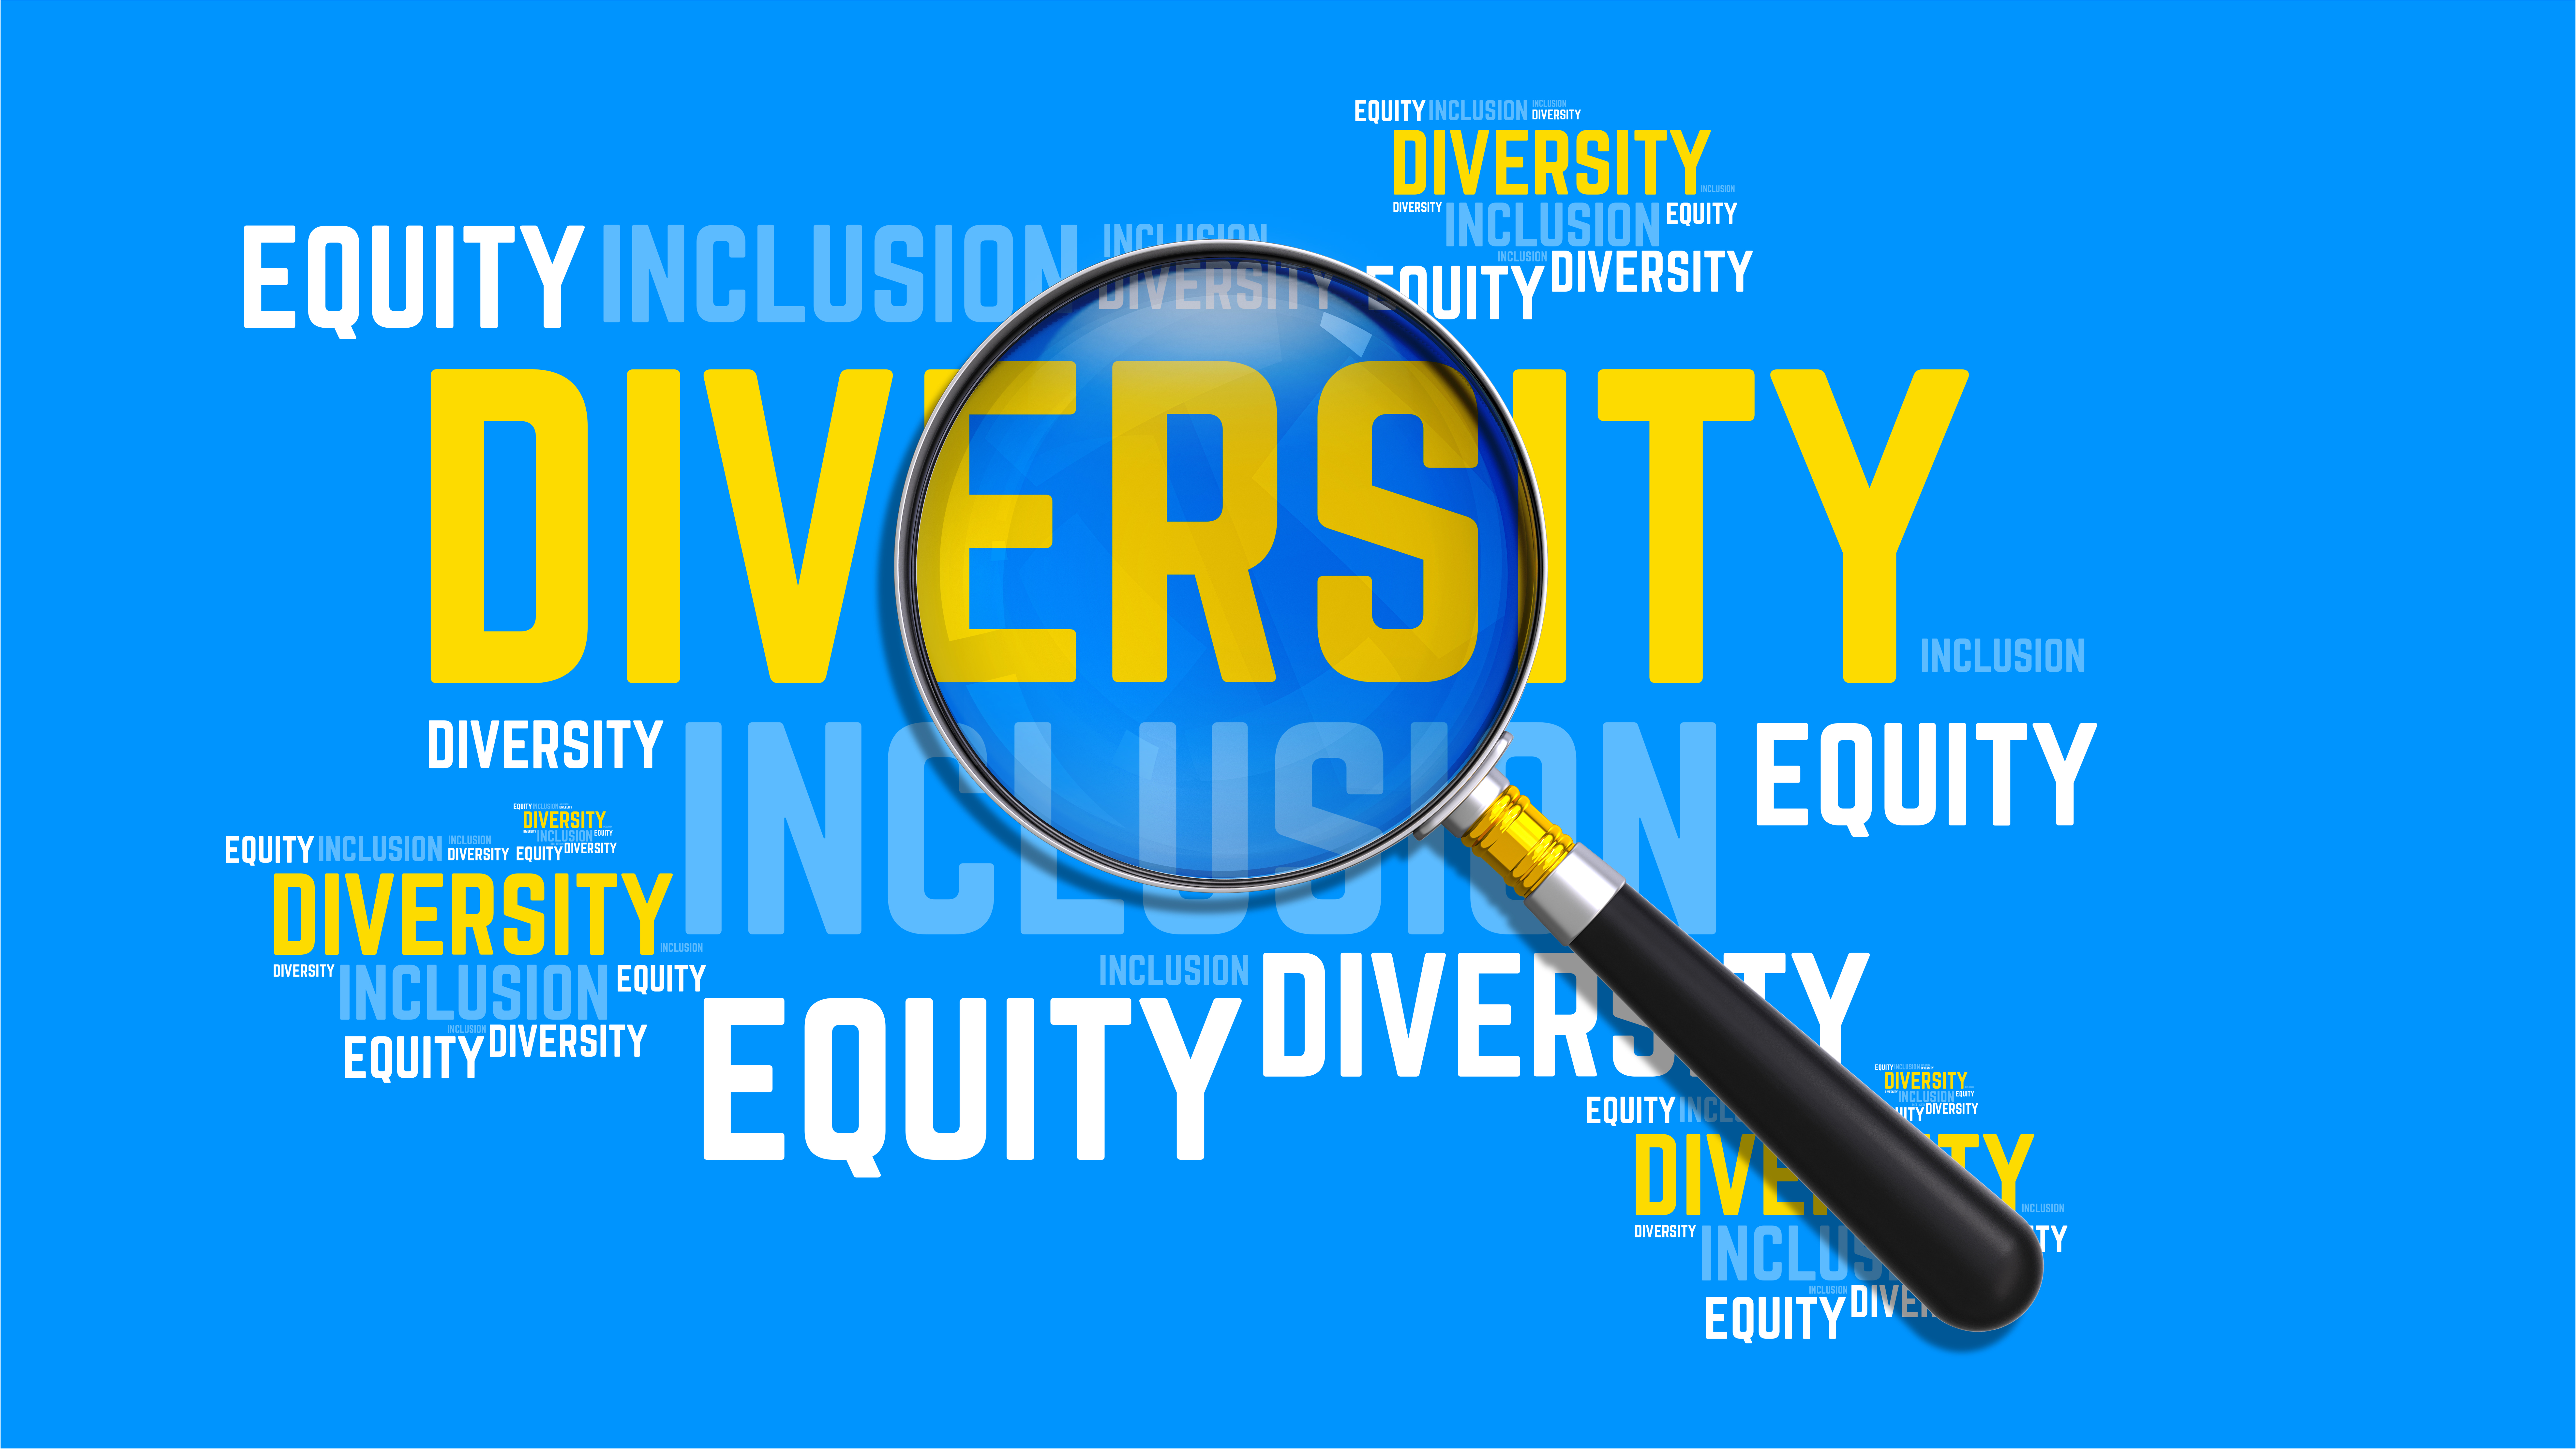 DIVERSITY, EQUITY, INCLUSION - stock photo